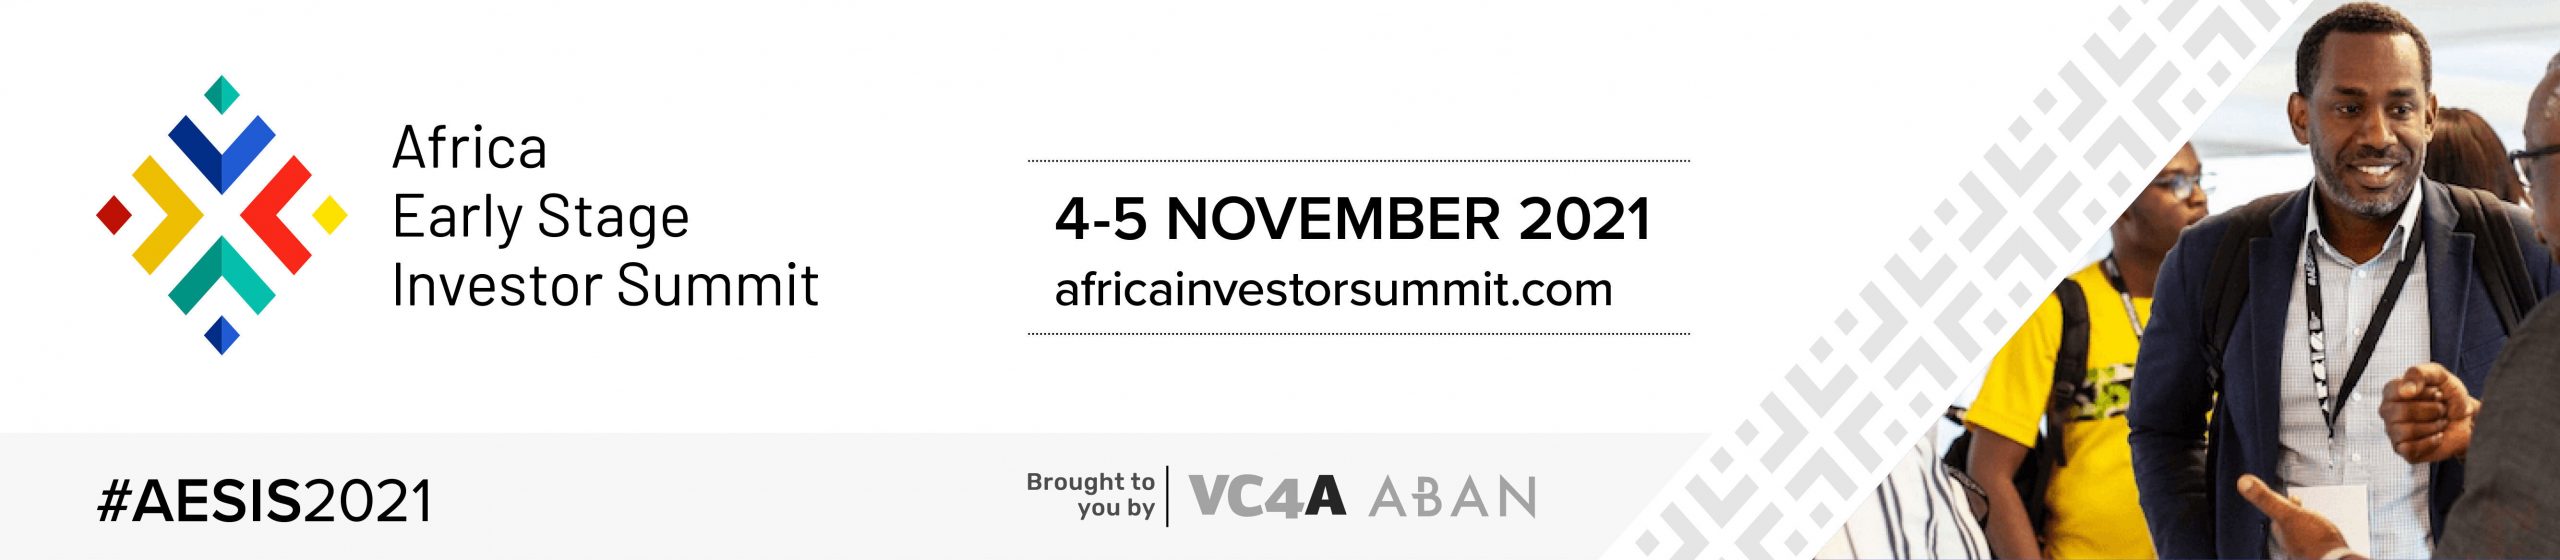 Africa Early Stage Investor Summit #AESIS2021 Takes Place 4 - 5 November 2021